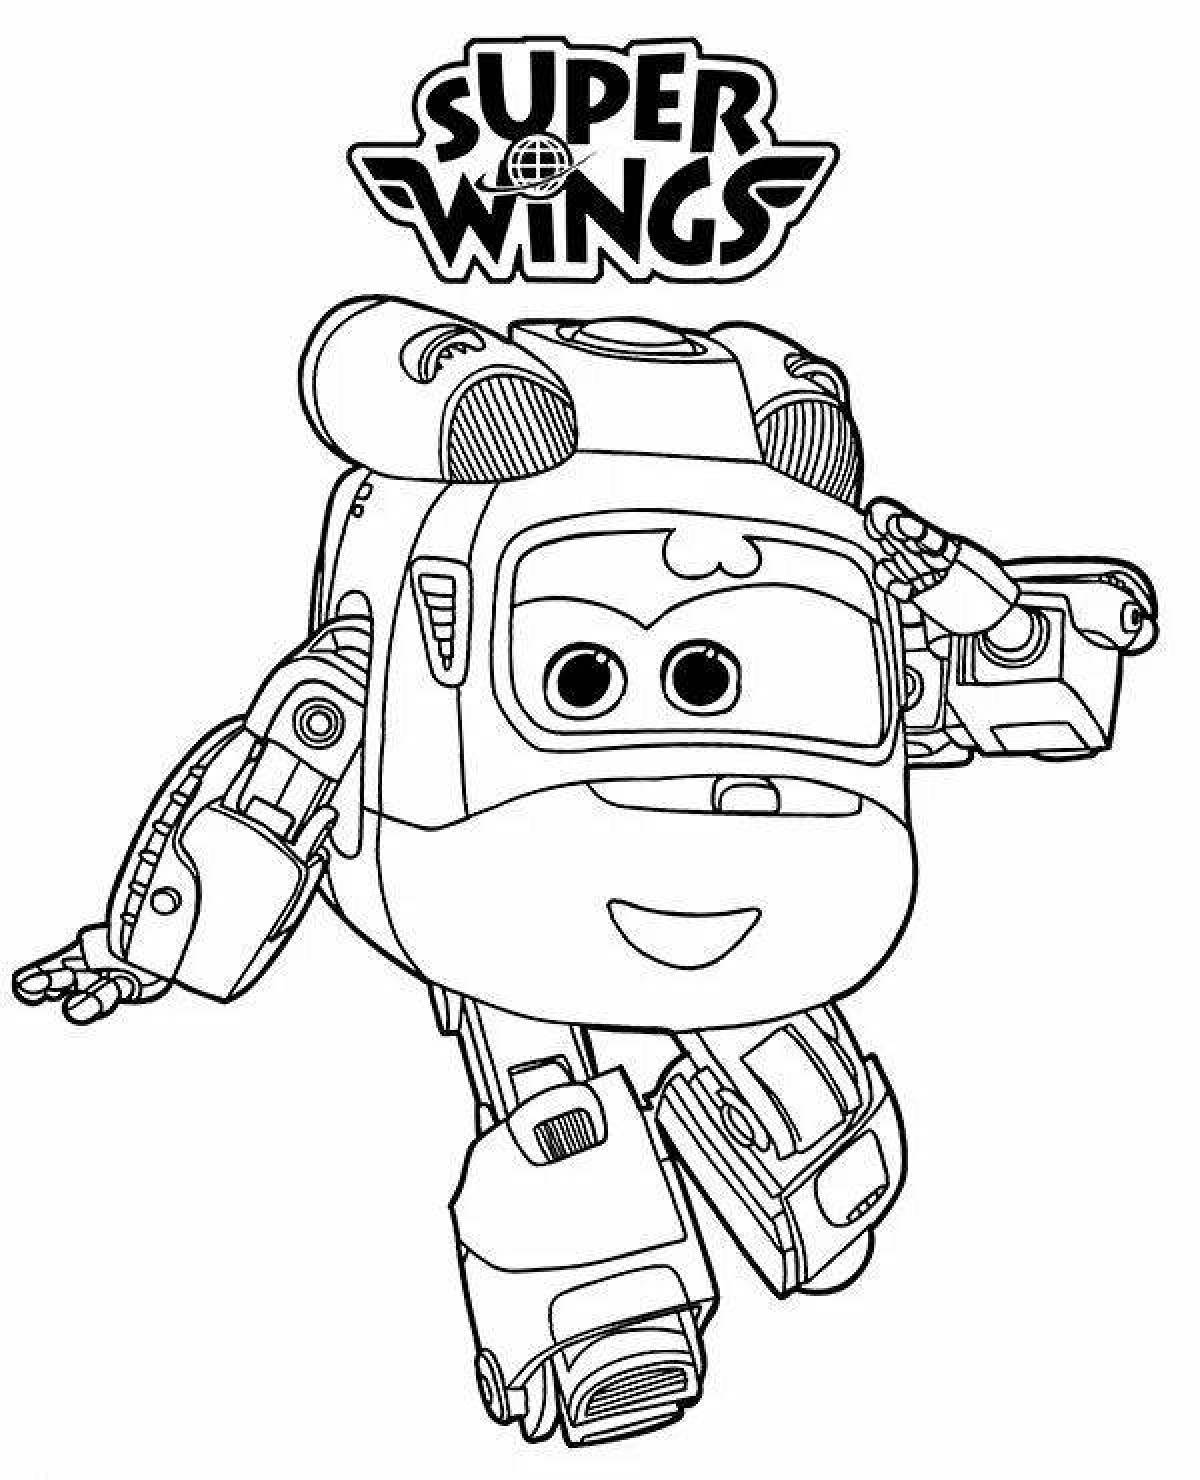 Coloring bright dizzy super wings